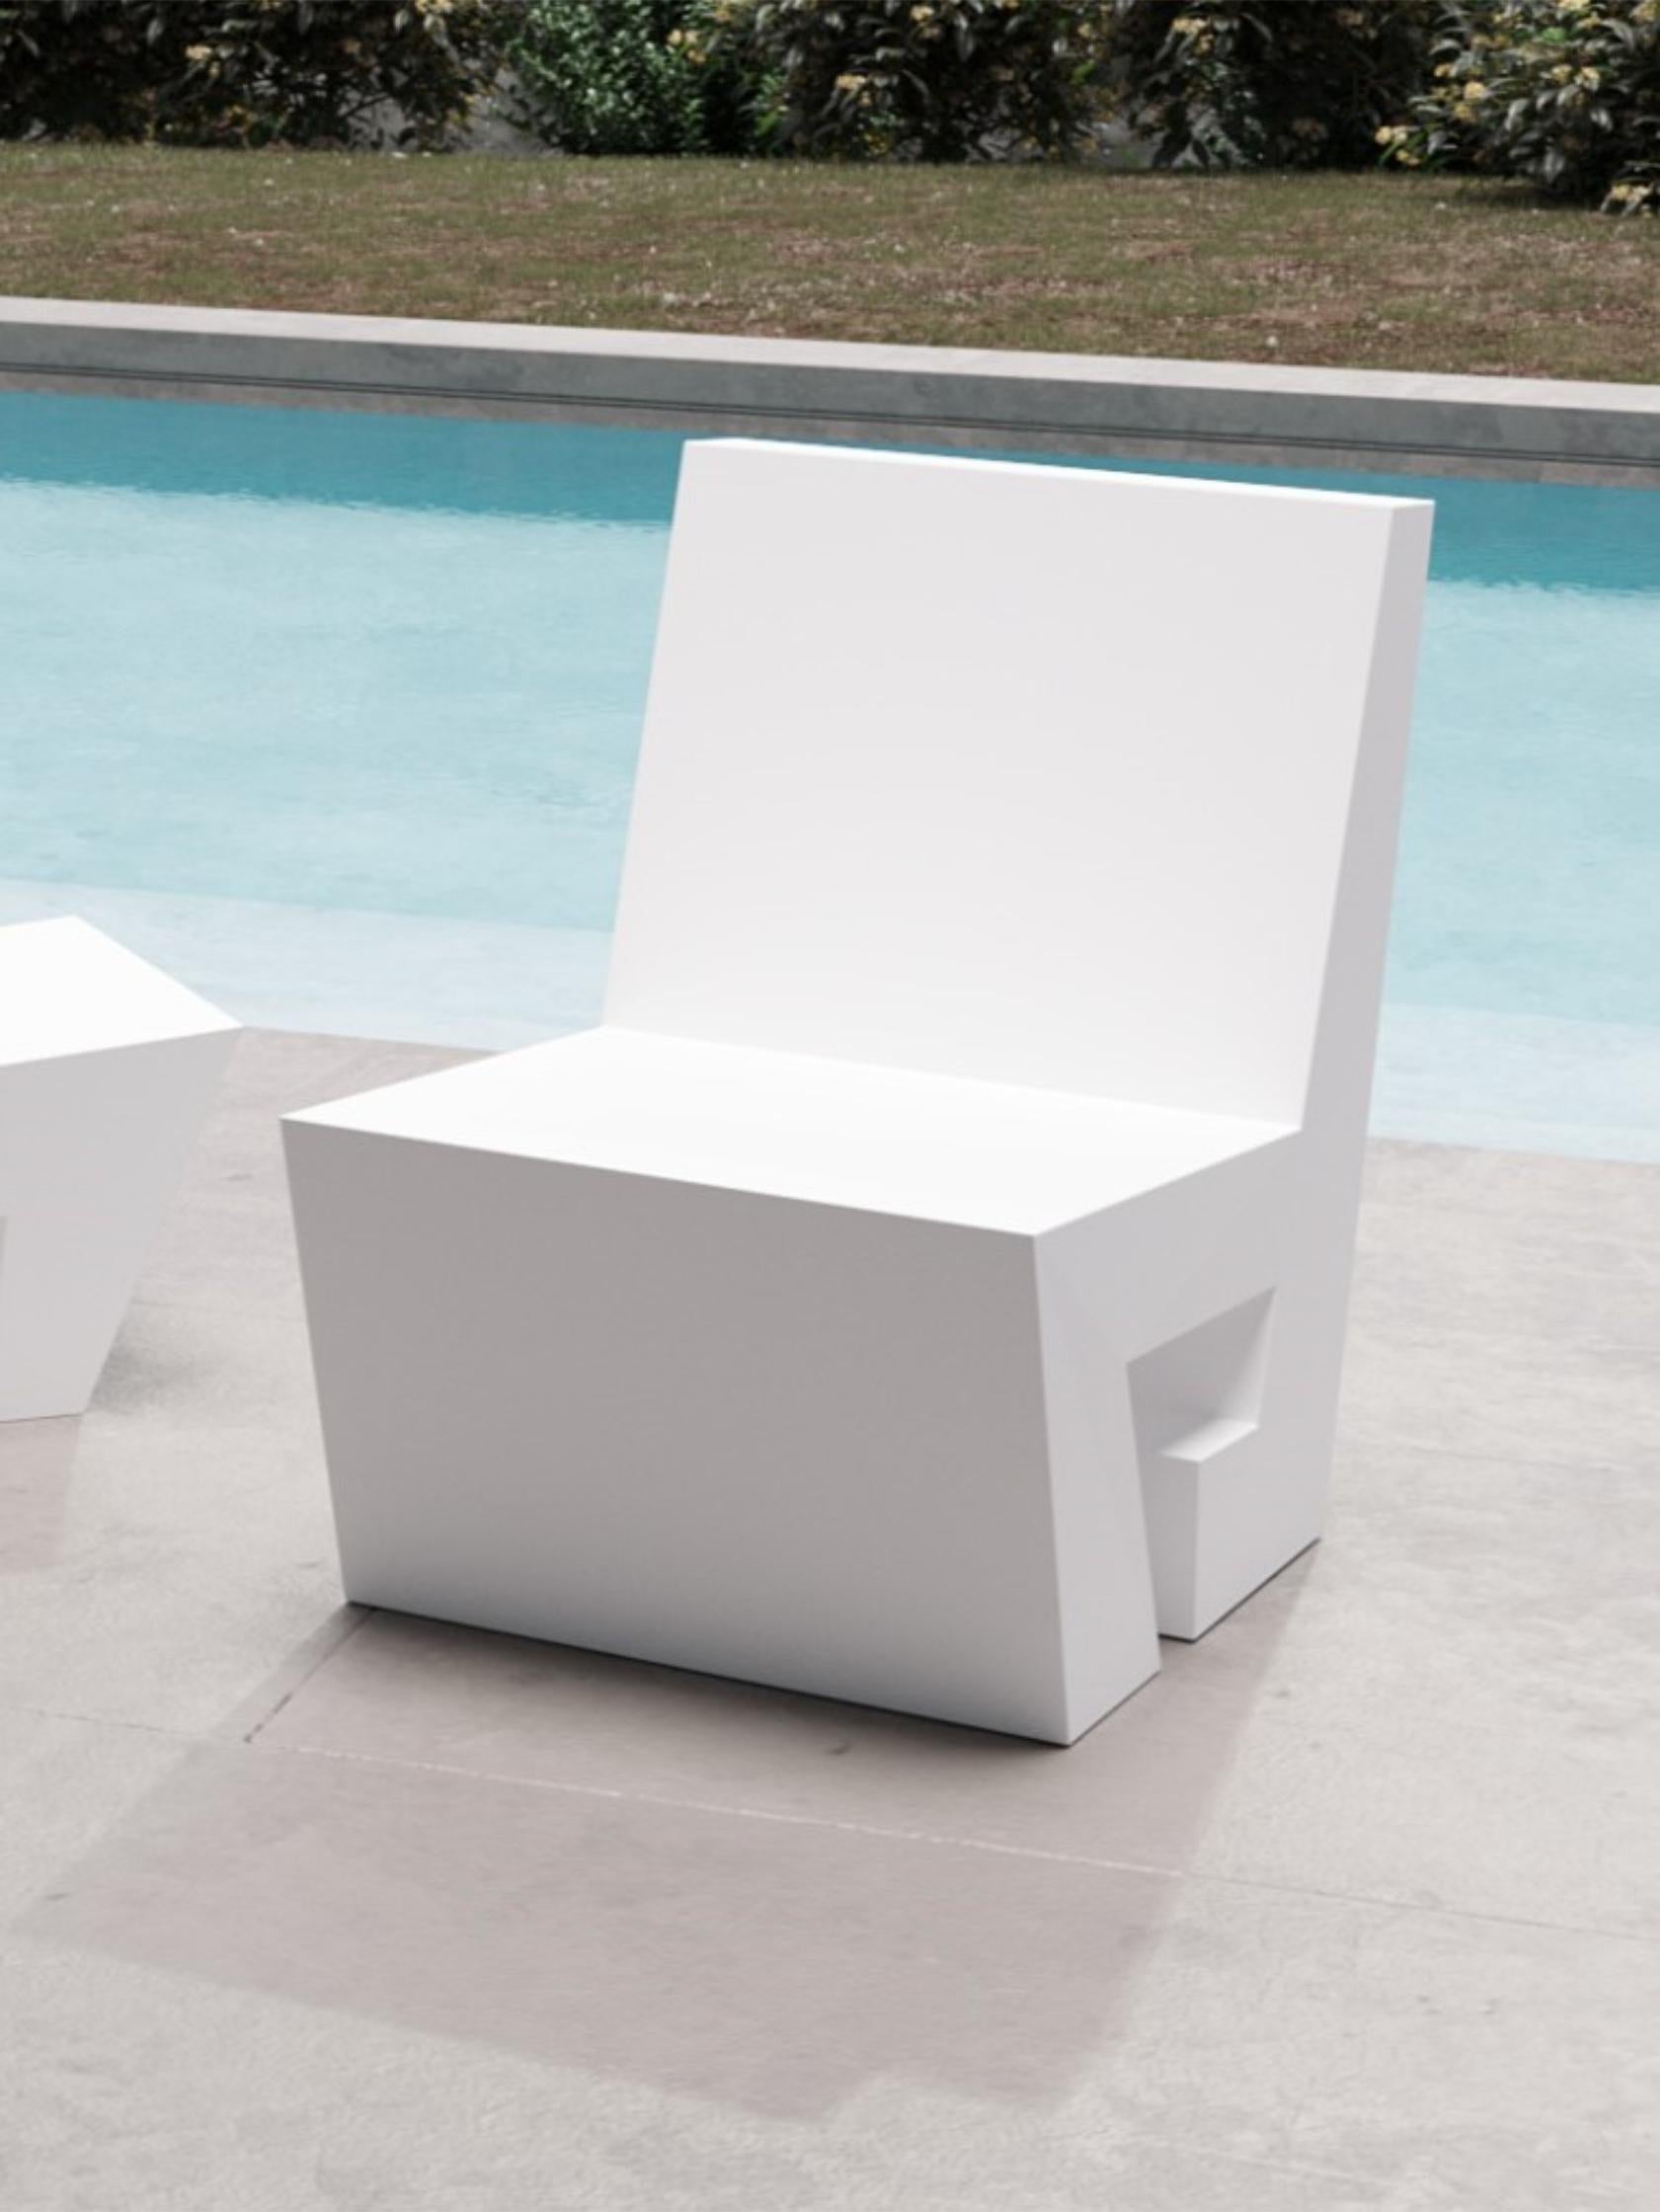 Quarry Outdoor Armchair by Andrea Giomi
Dimensions: D 55 x W 70 x H 84 cm
Materials: Recycled foam, treated with innovative rubber effect material.

Andrea Giomi, was born in Castelfiorentino in the province of Florence in
1970. Develops his